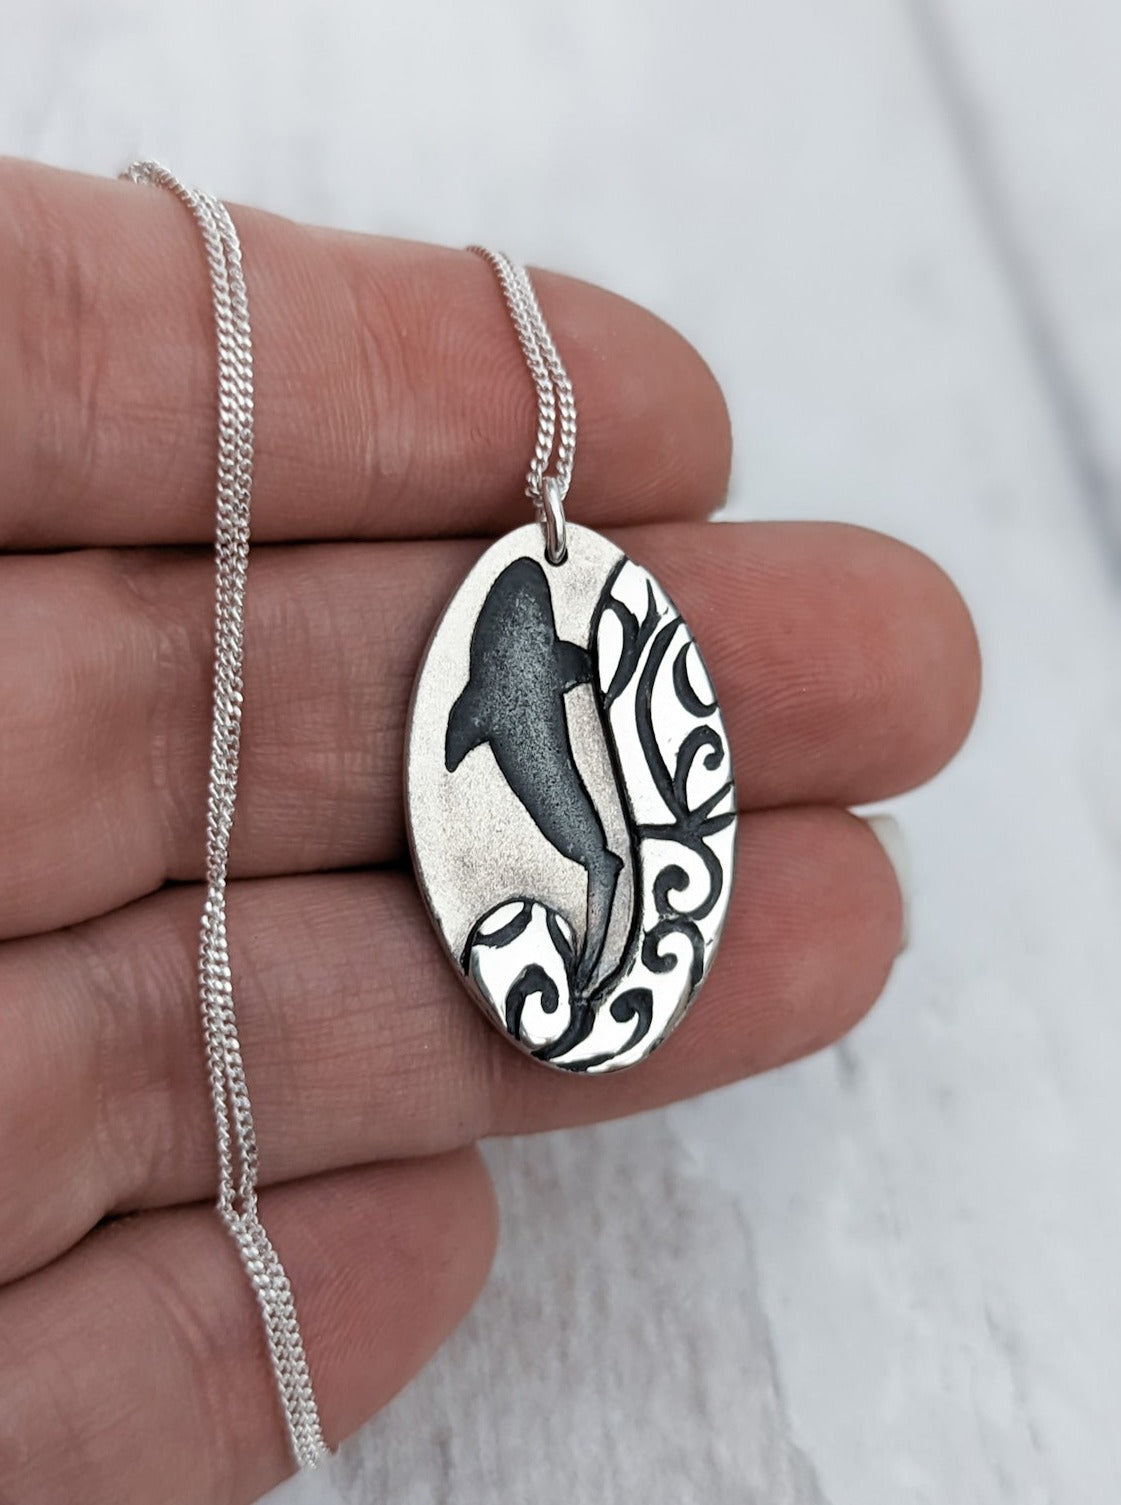 Silver shark silhouette necklace